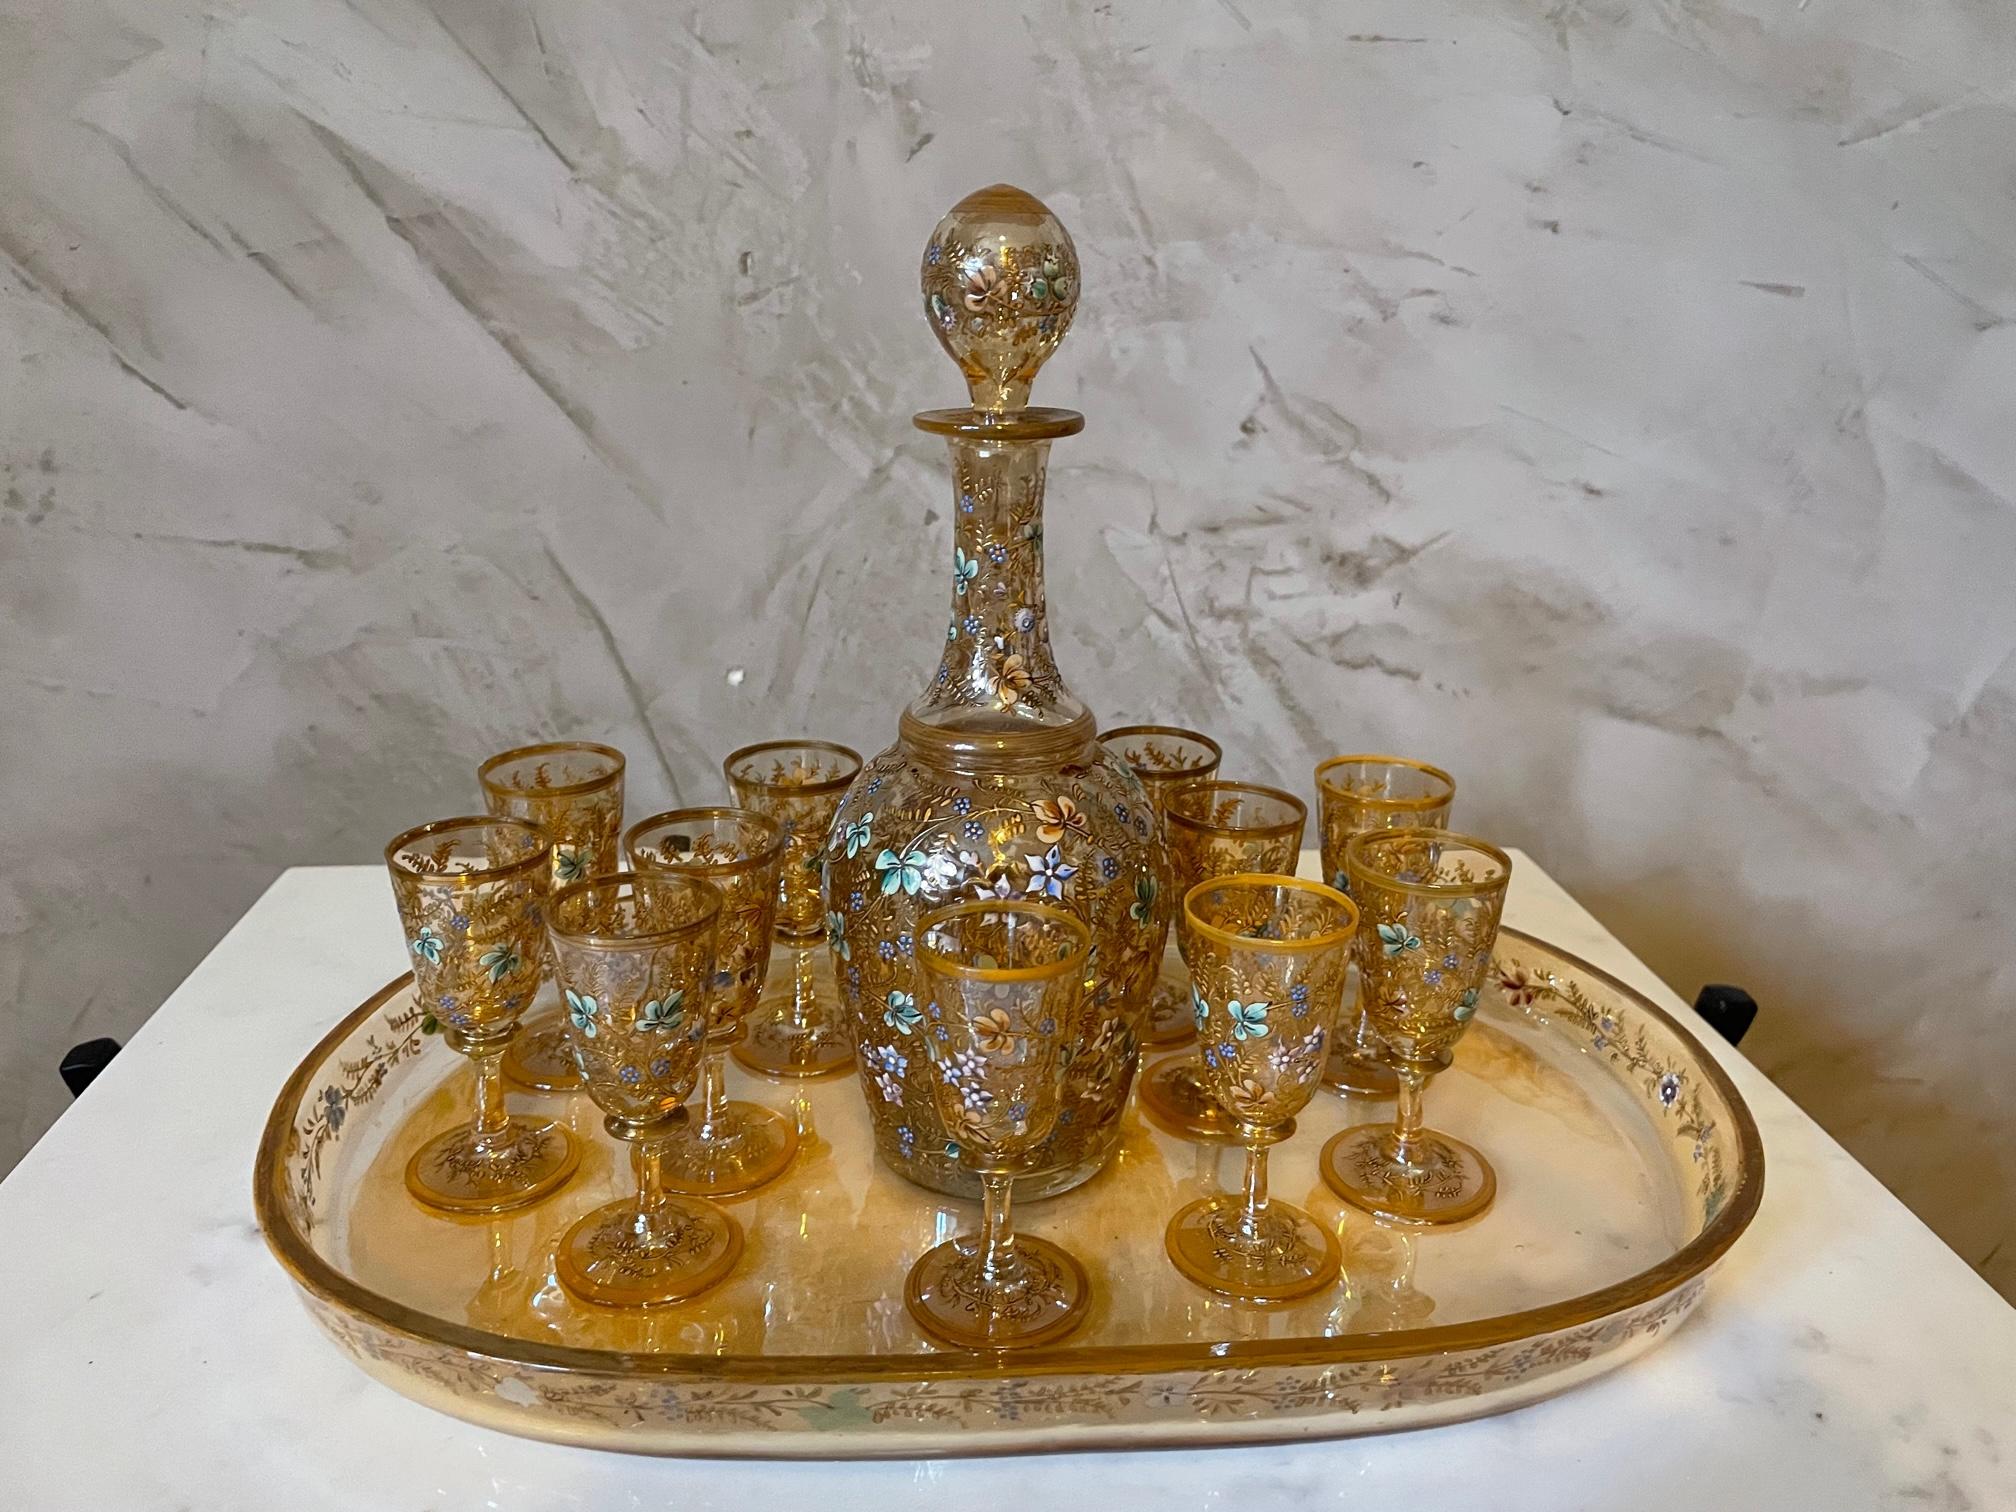 Very nice and rare enameled glass service from the 1900s, a tray, a carafe with a plug and 12 liquor glasses. 
Beautiful amber color with golden and blue flower decoration. 
Very good quality and condition.